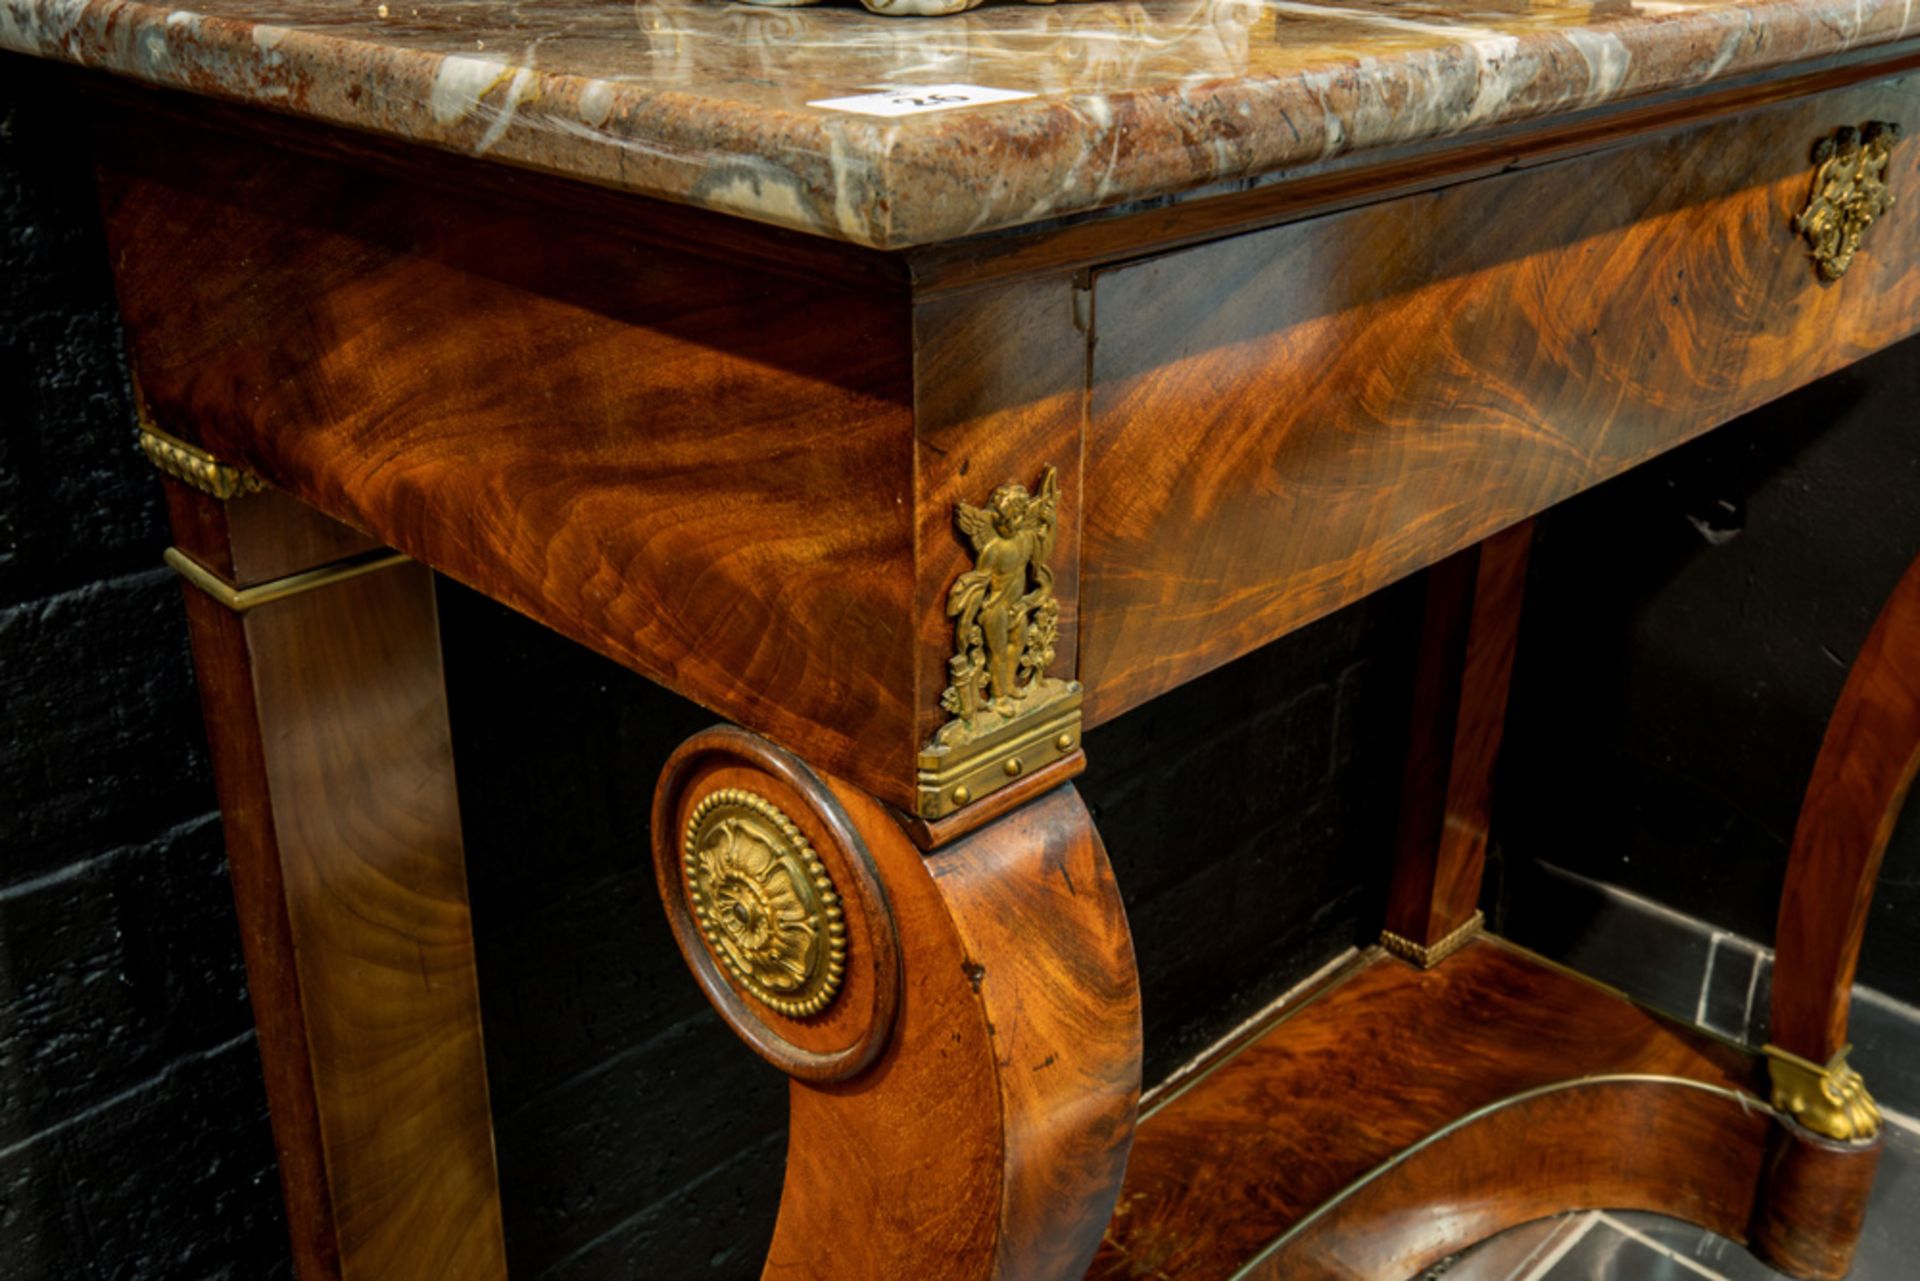 early 19th Cent. Empire style console in mahogany with ornaments in gilded bronze - with a drawer - Bild 2 aus 3